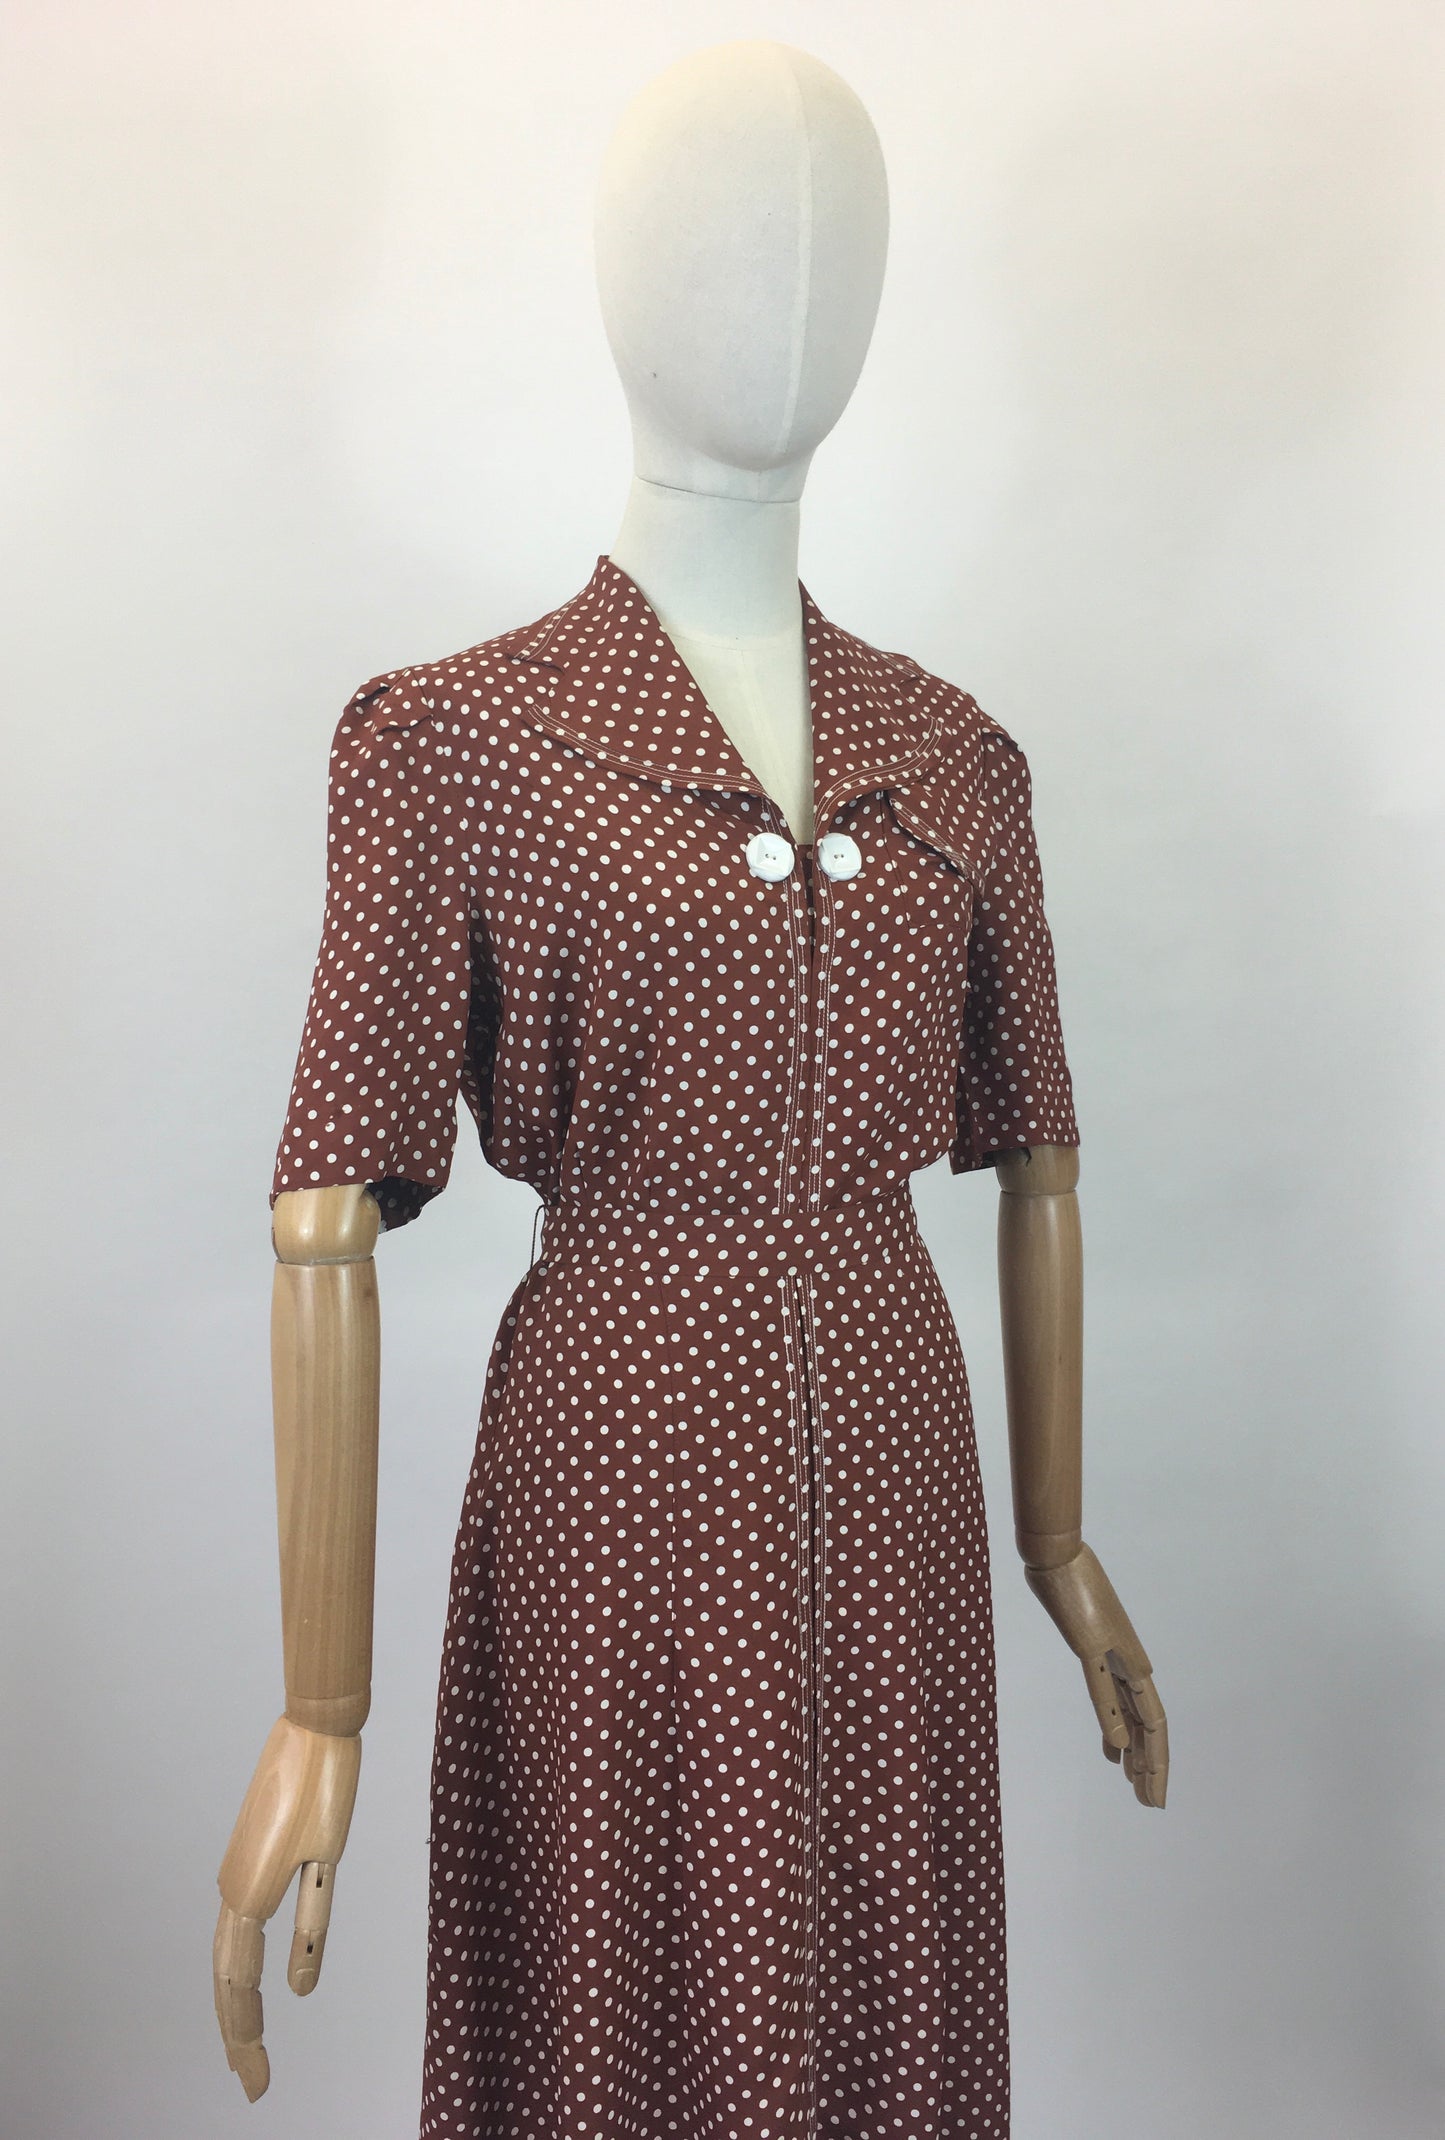 Original 1940s Beautiful Polka Dot Dress - Chestnut Brown with white dots.